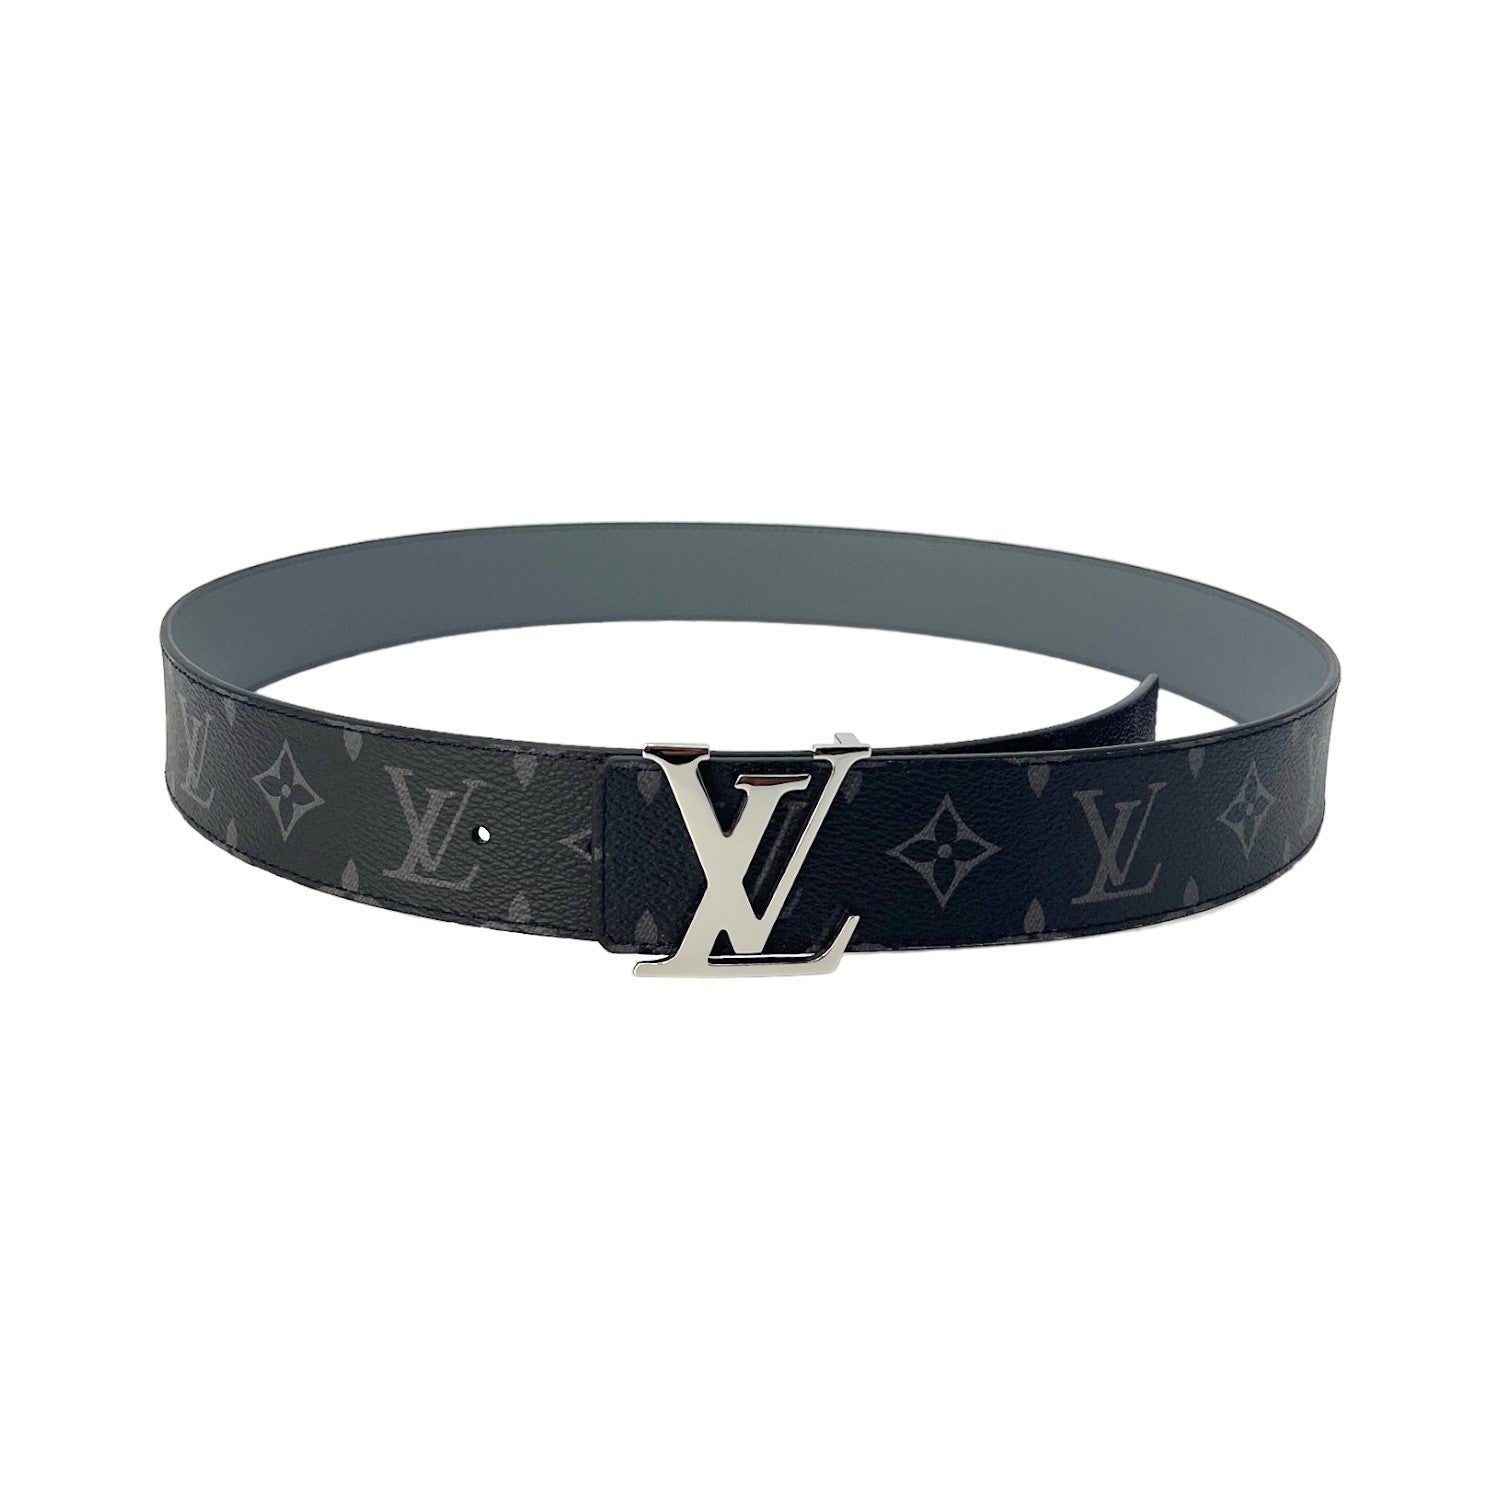 white and black louis vuittons belt